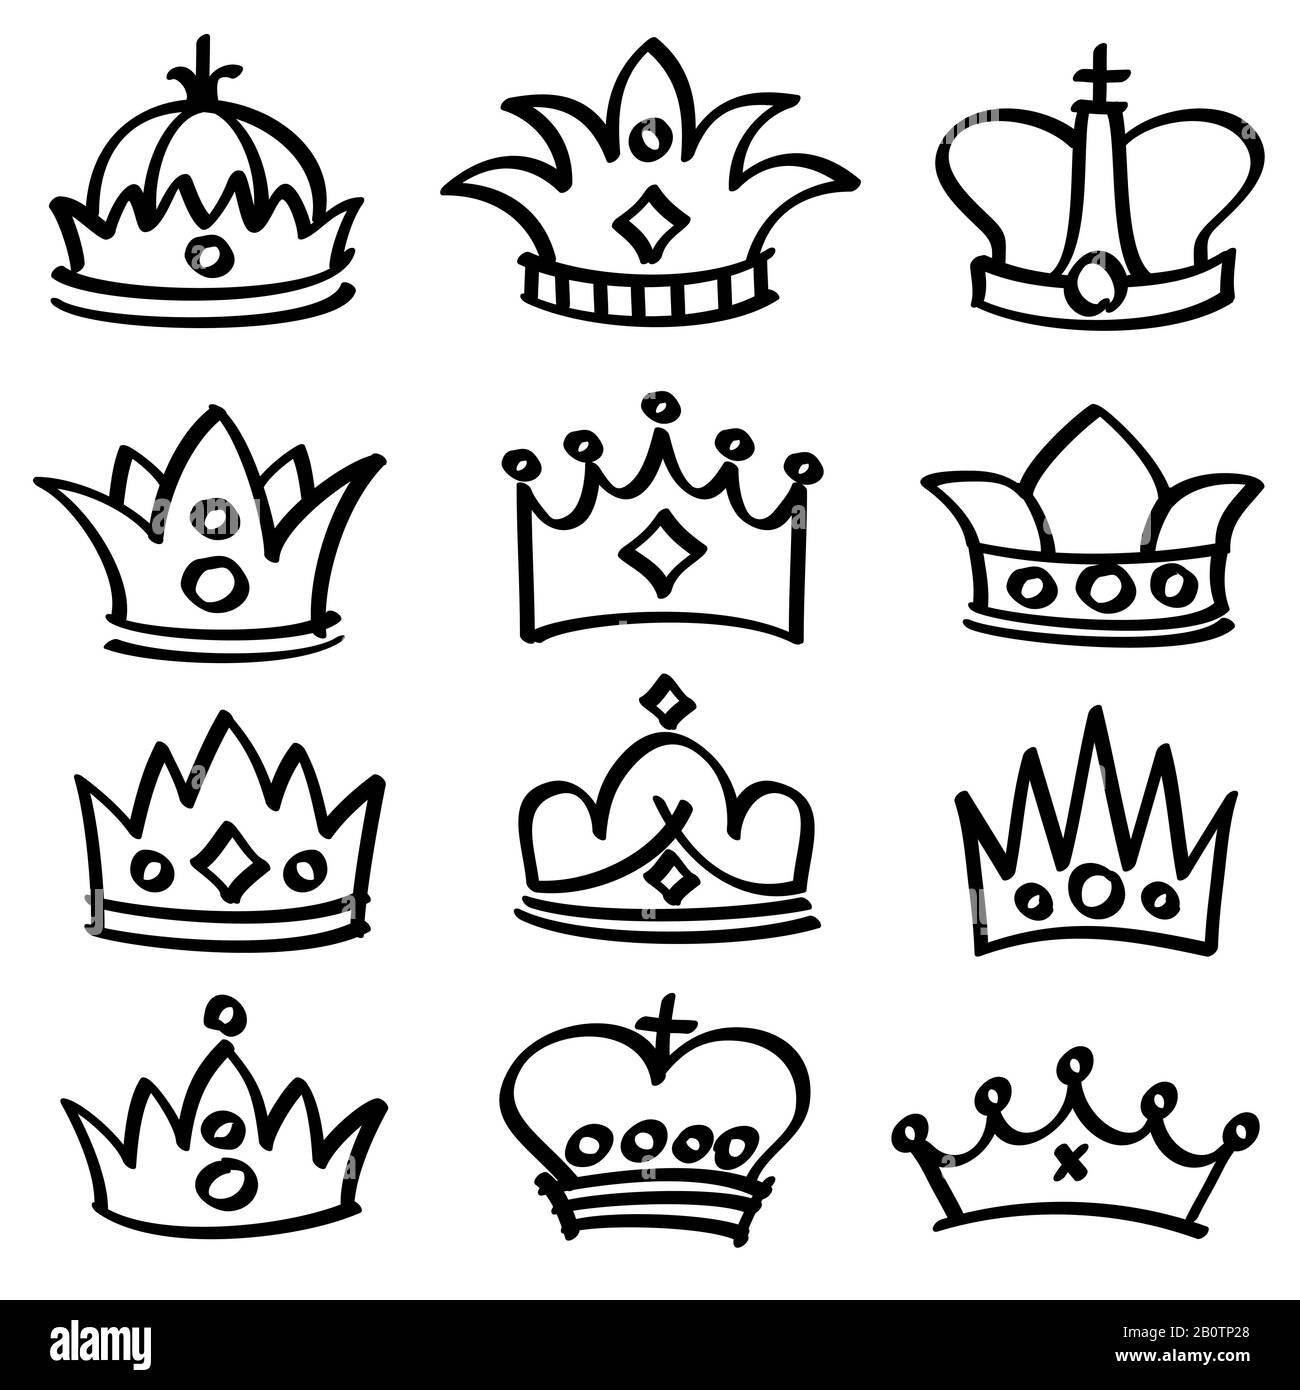 Luxury doodle queen crowns vector sketch collection. King crown and imperial doodle crown illustration Stock Vector